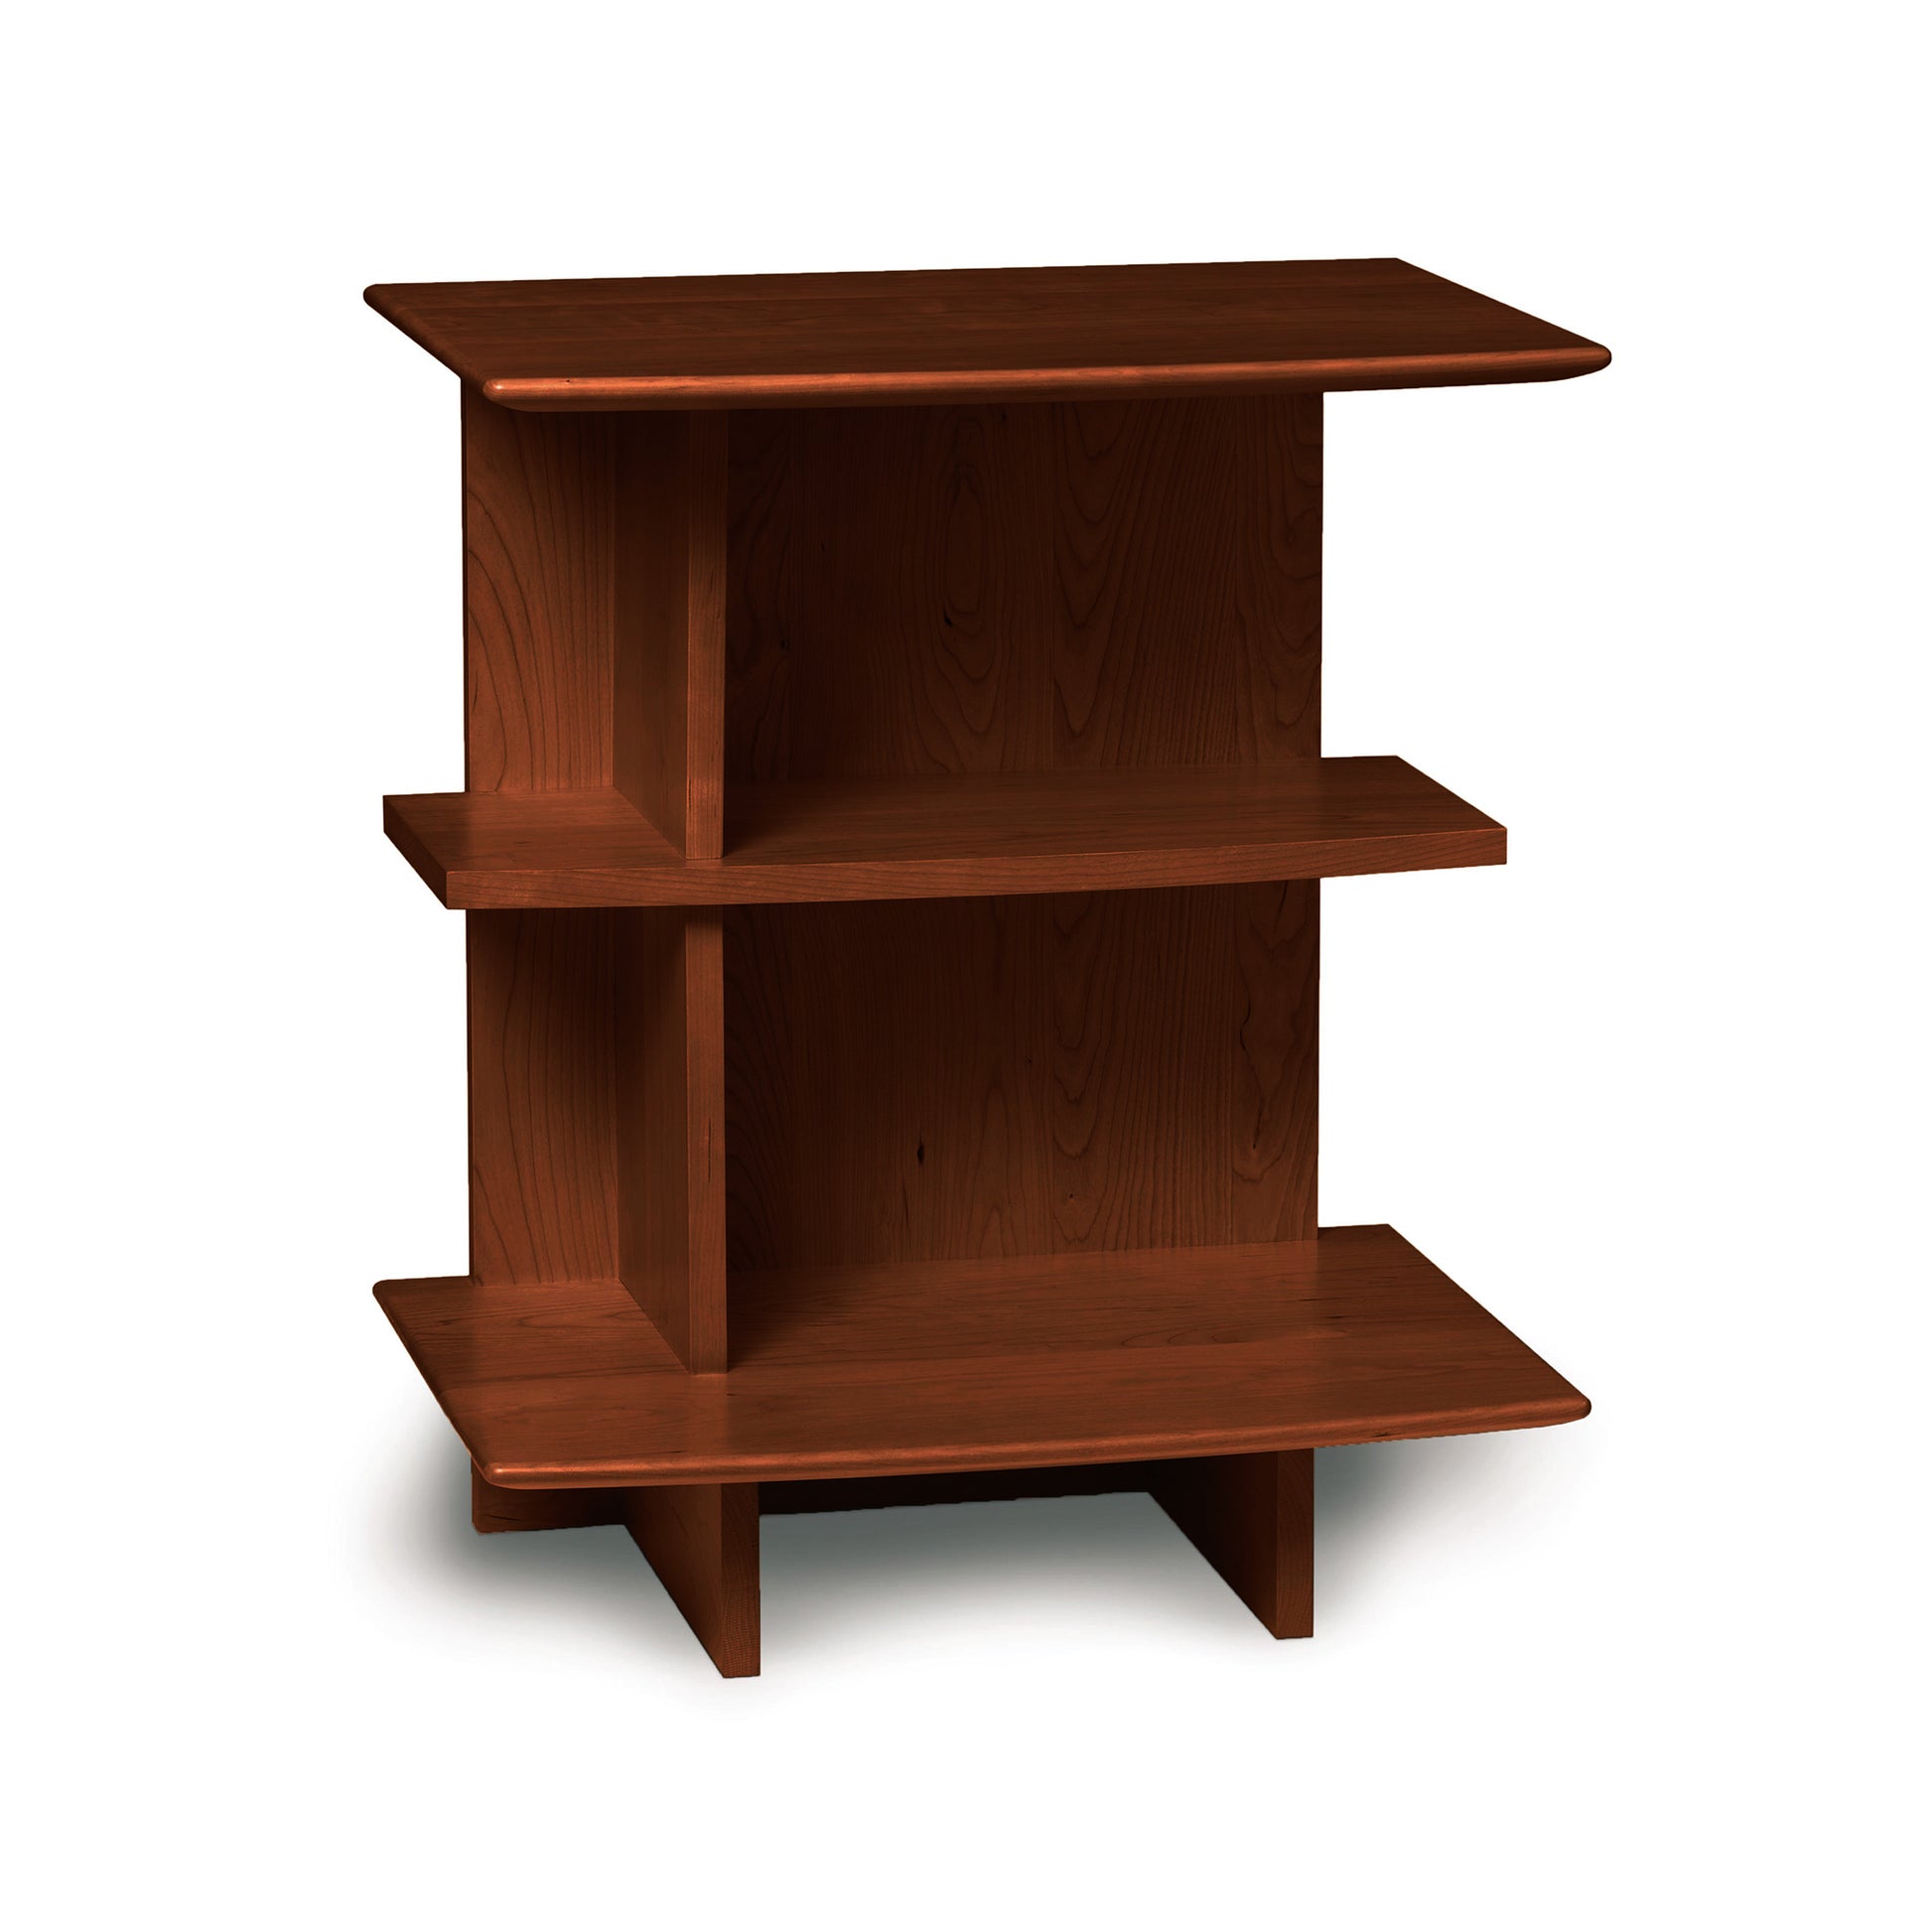 Three-tiered wooden shelving unit from the Copeland Furniture Sarah Open Shelf Nightstand Collection on a white background.